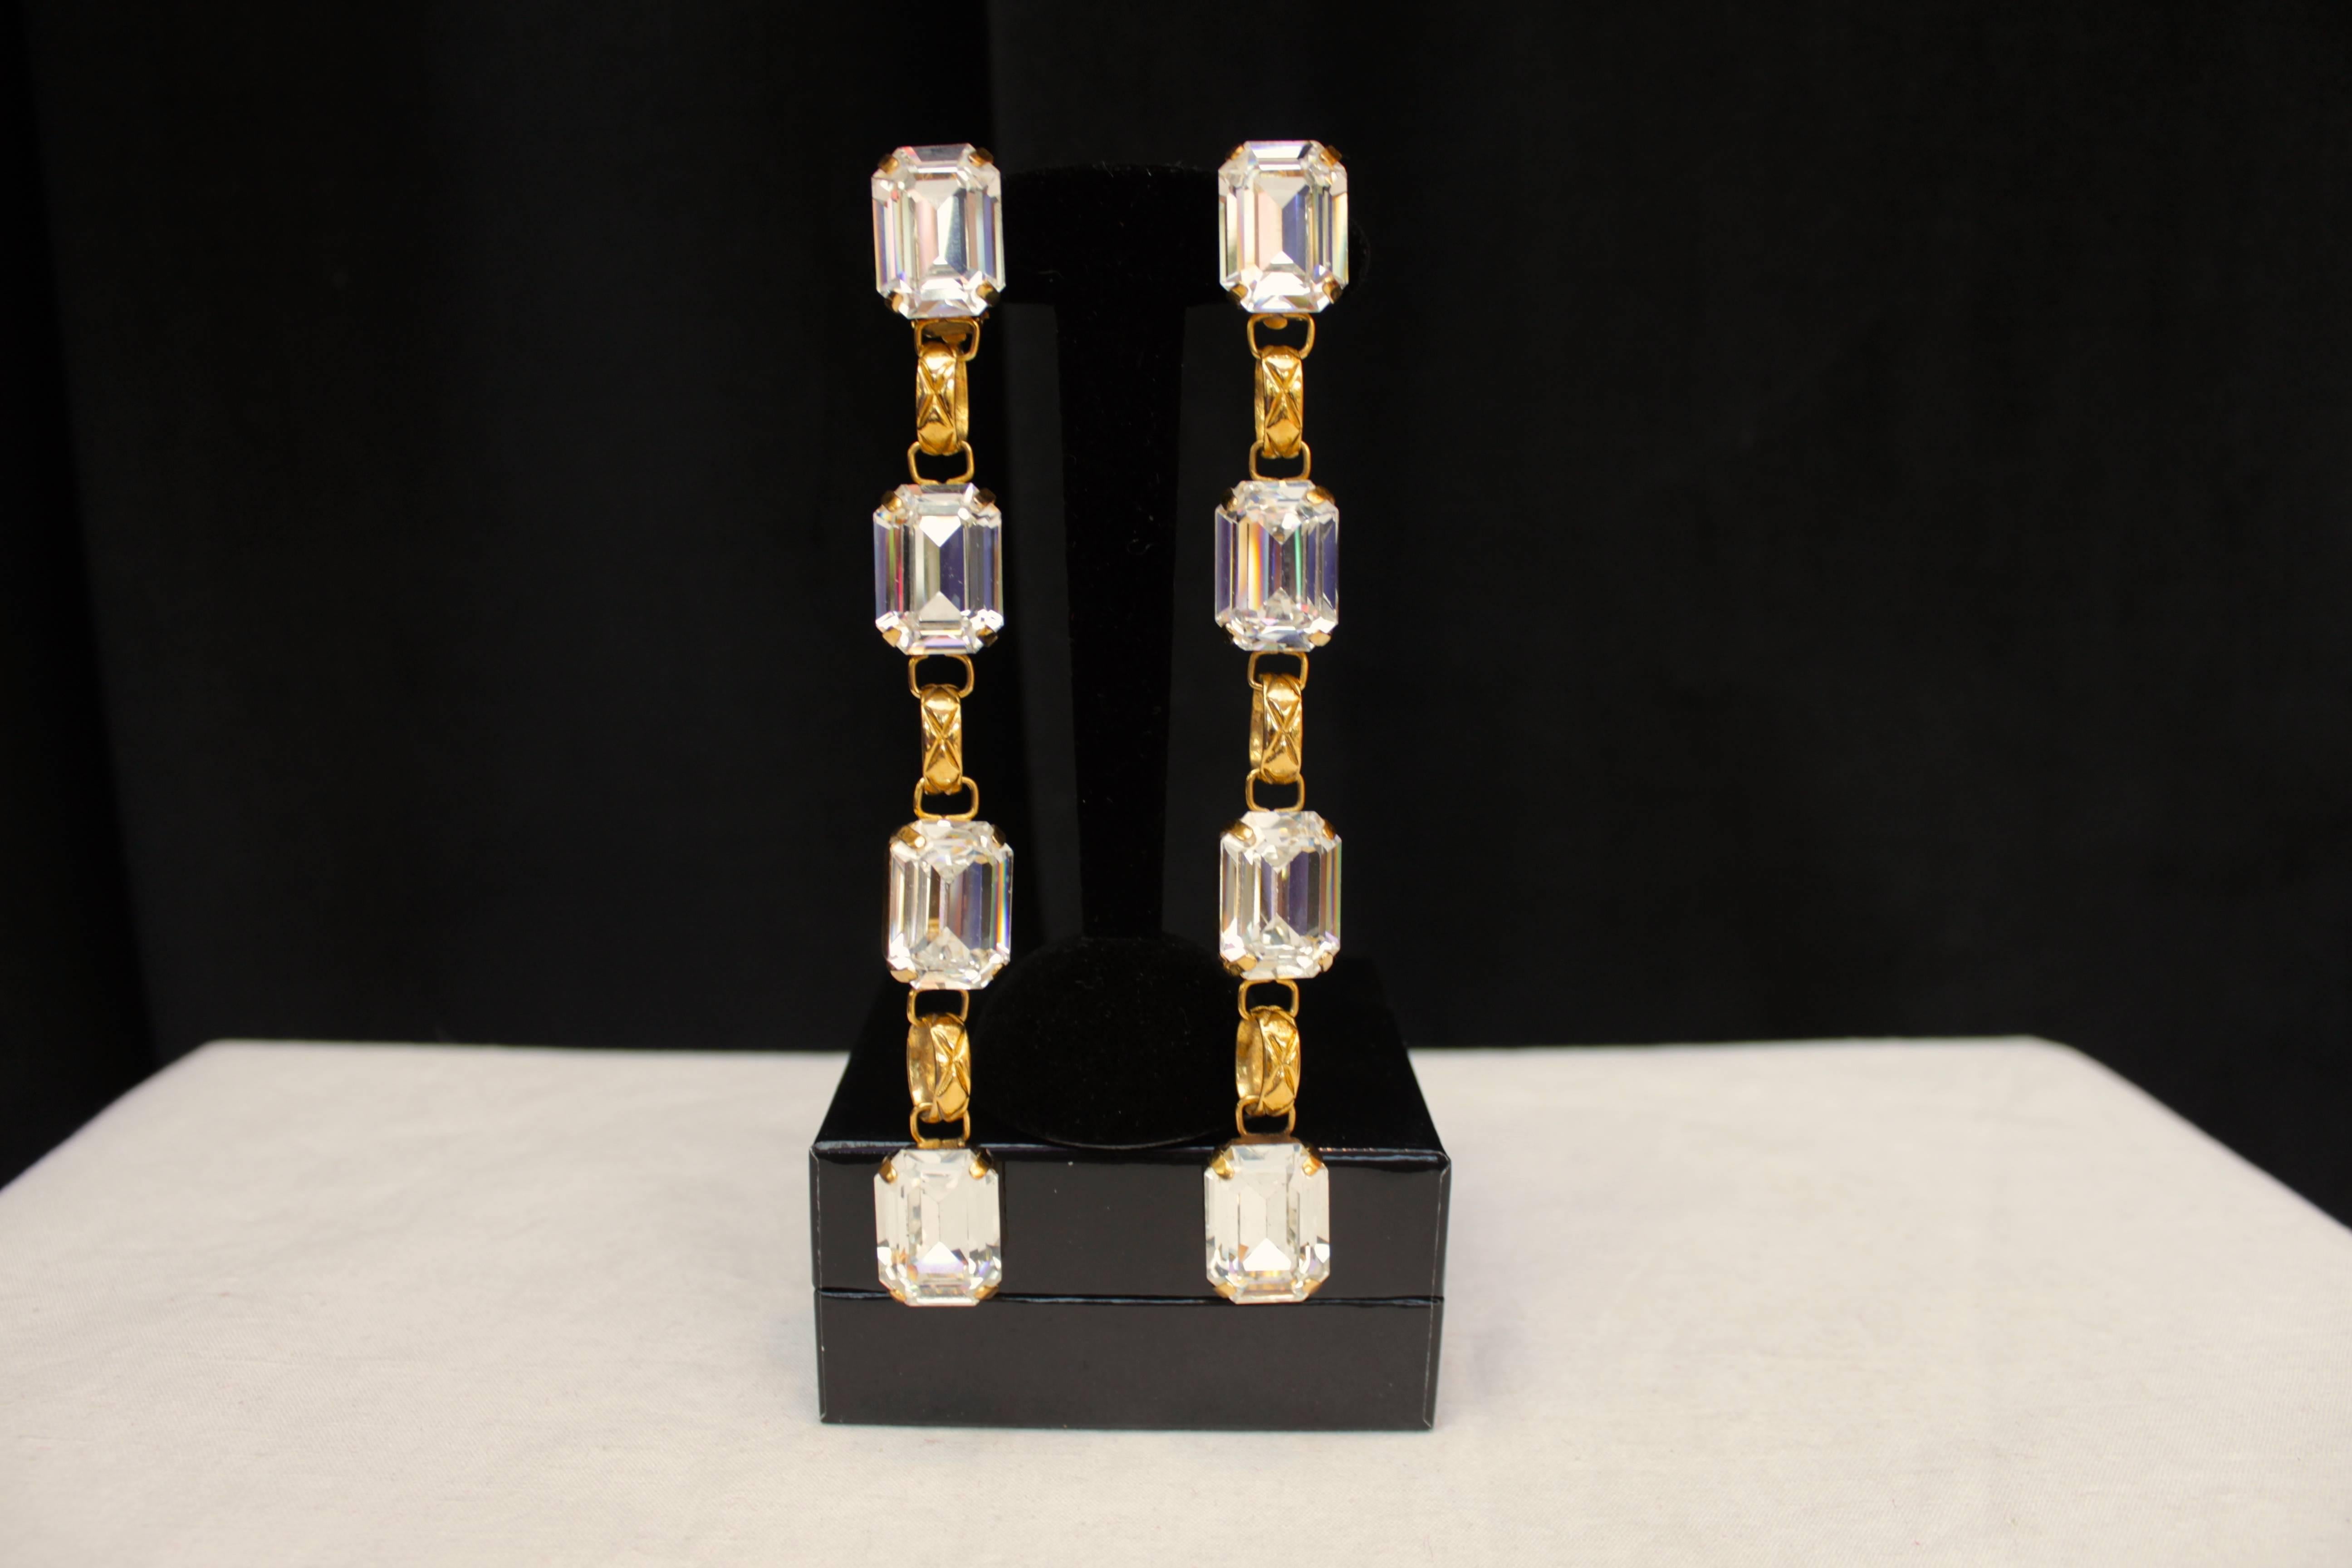 CHANEL (Made in France) Pair of pendant clip on earrings featuring white rectangular crystals with an emerald cut, alternating with quilted gilt metal chain links.

Collection 2 5 from the early 1990s.

Very good condition.

Measurements: